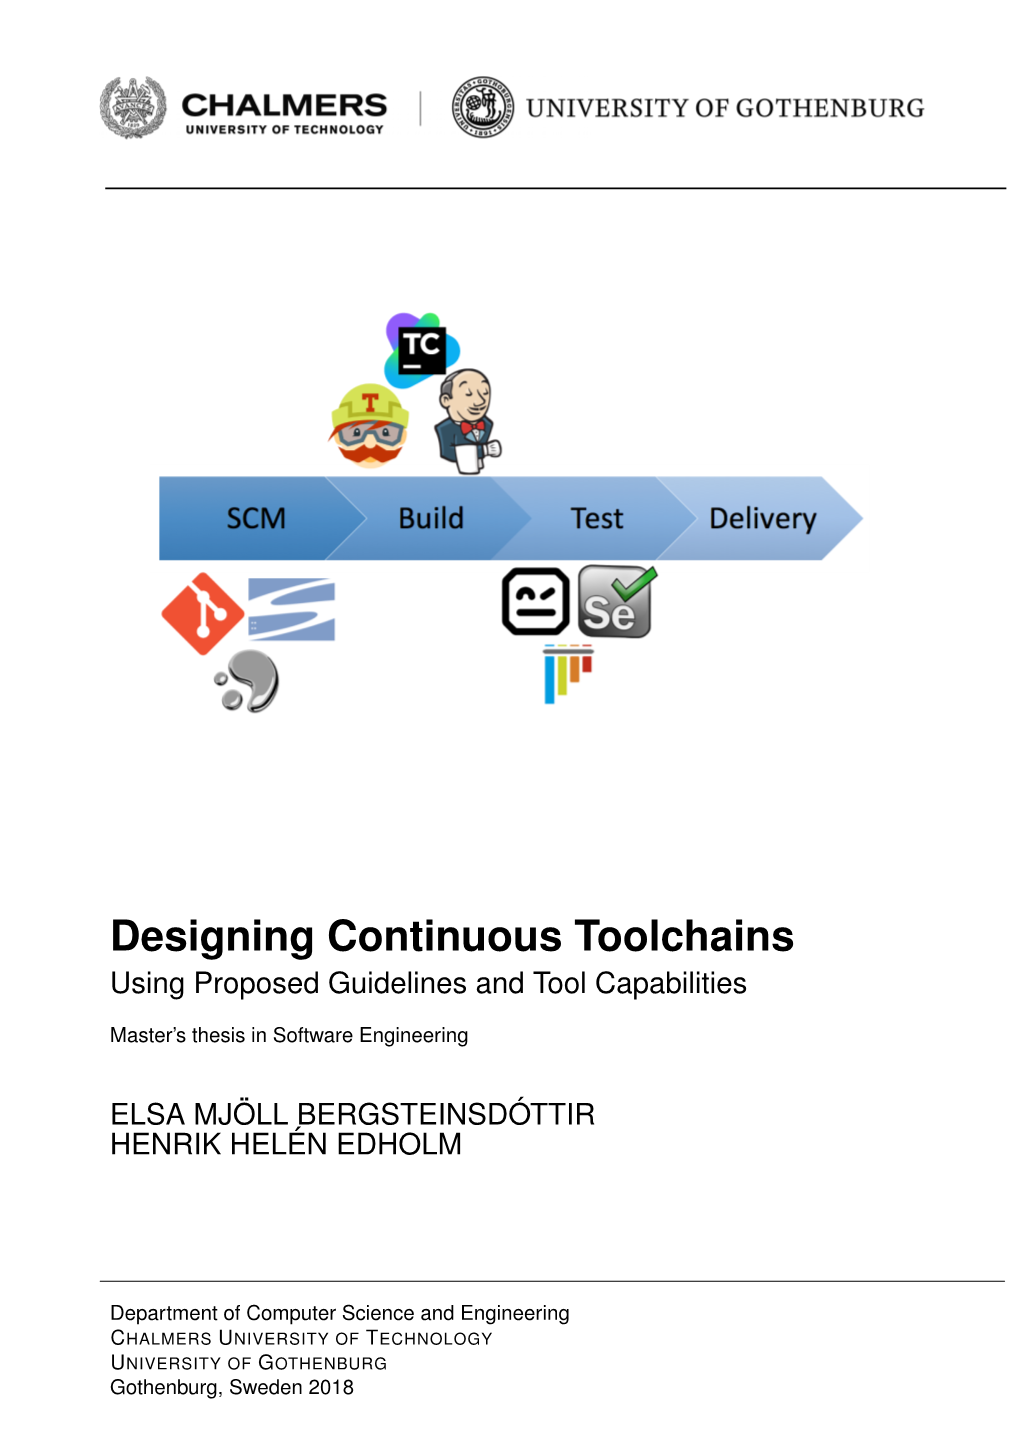 Designing Continuous Toolchains Using Proposed Guidelines and Tool Capabilities